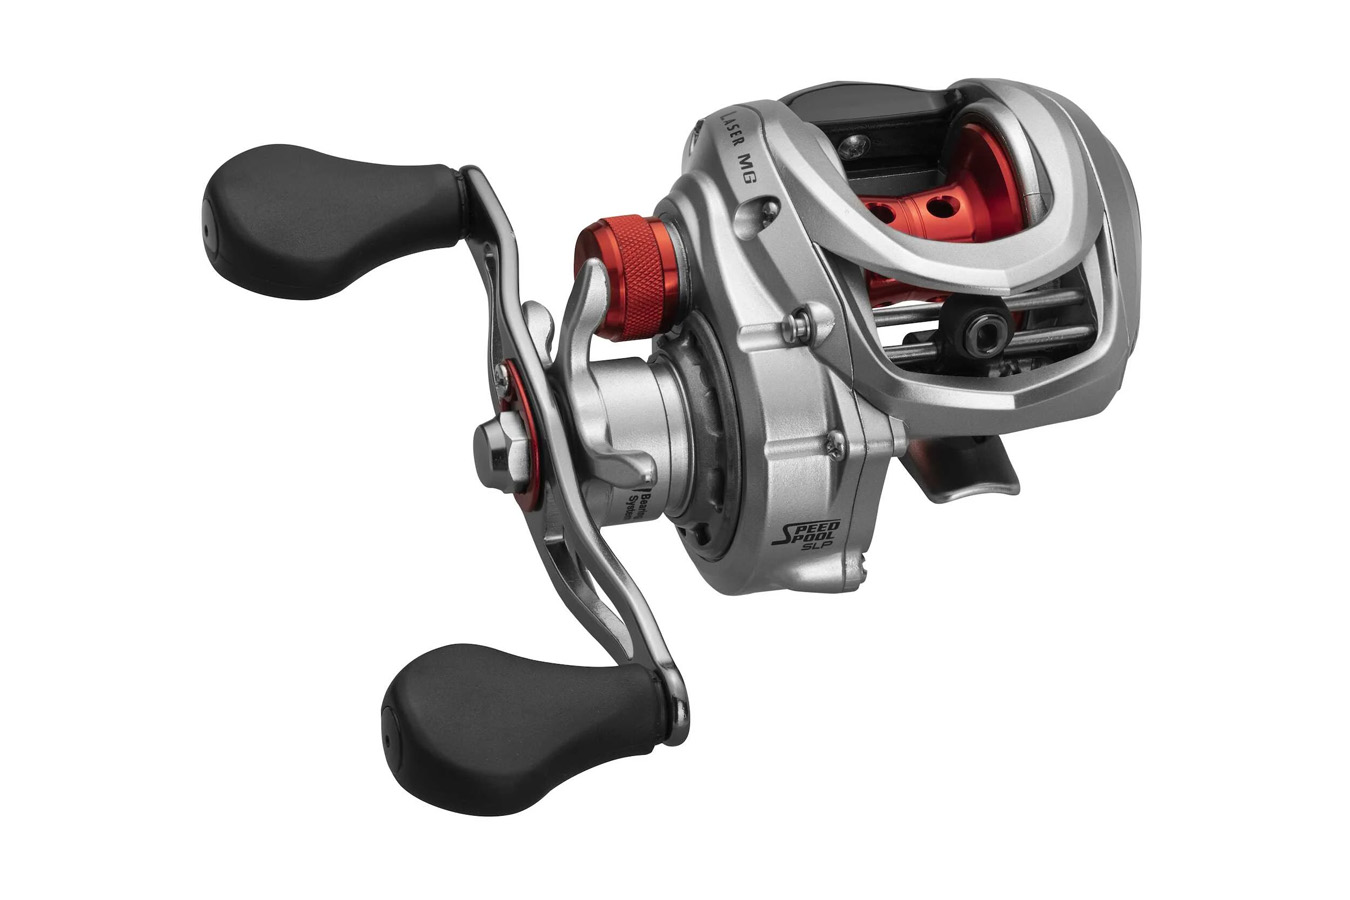 Discount Lew's Laser MG 7.5:1 Baitcast Reel for Sale